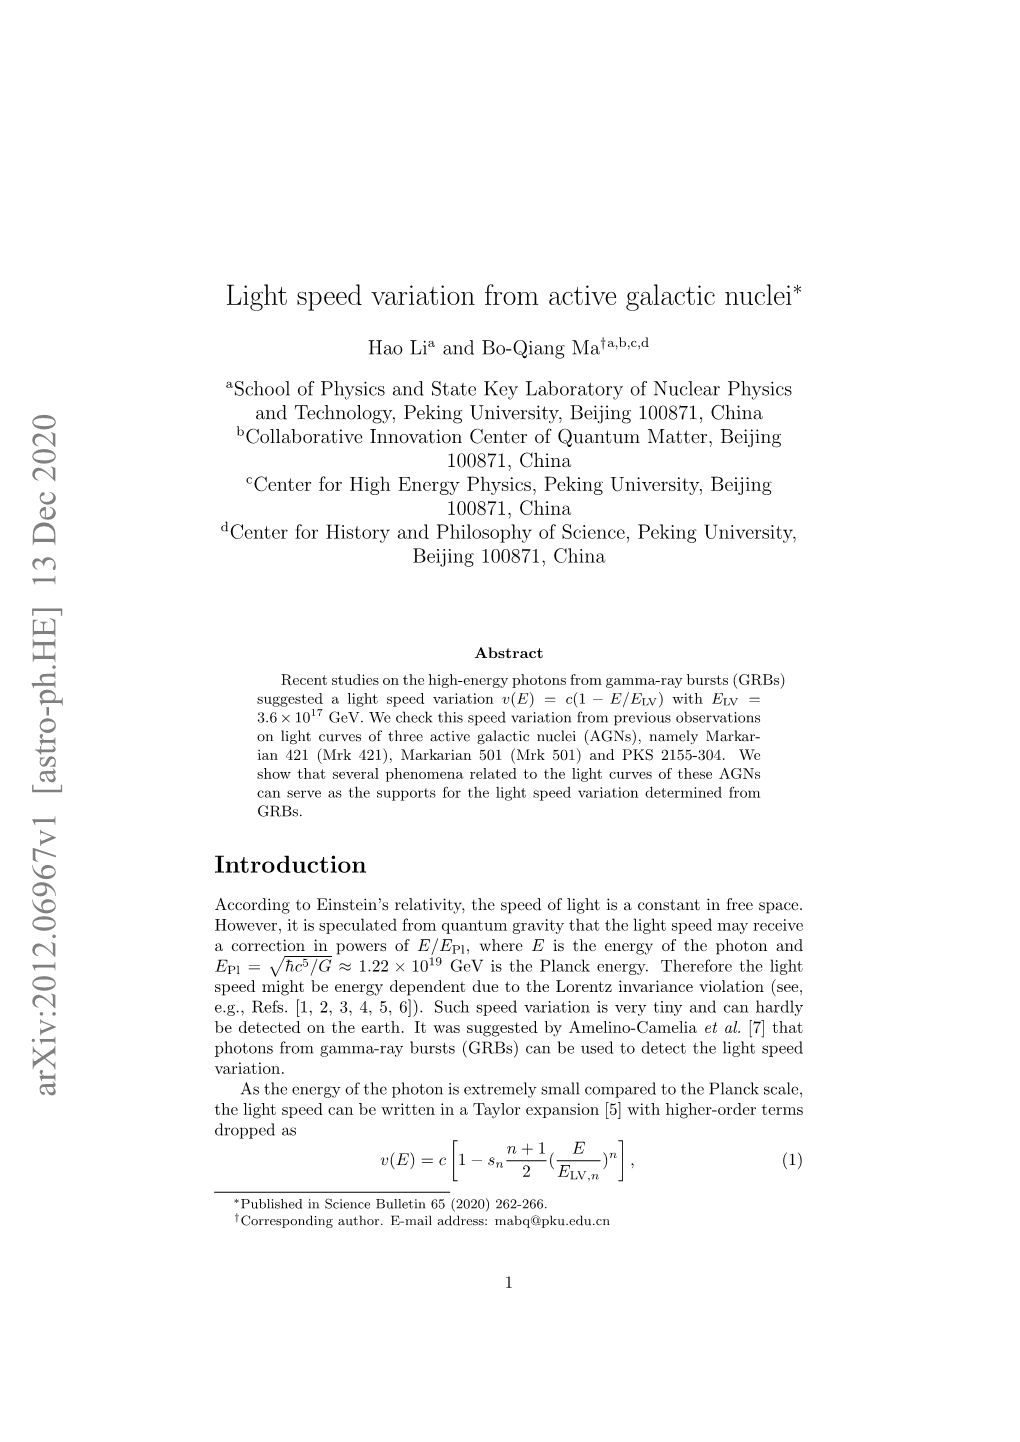 Light Speed Variation from Active Galactic Nuclei∗